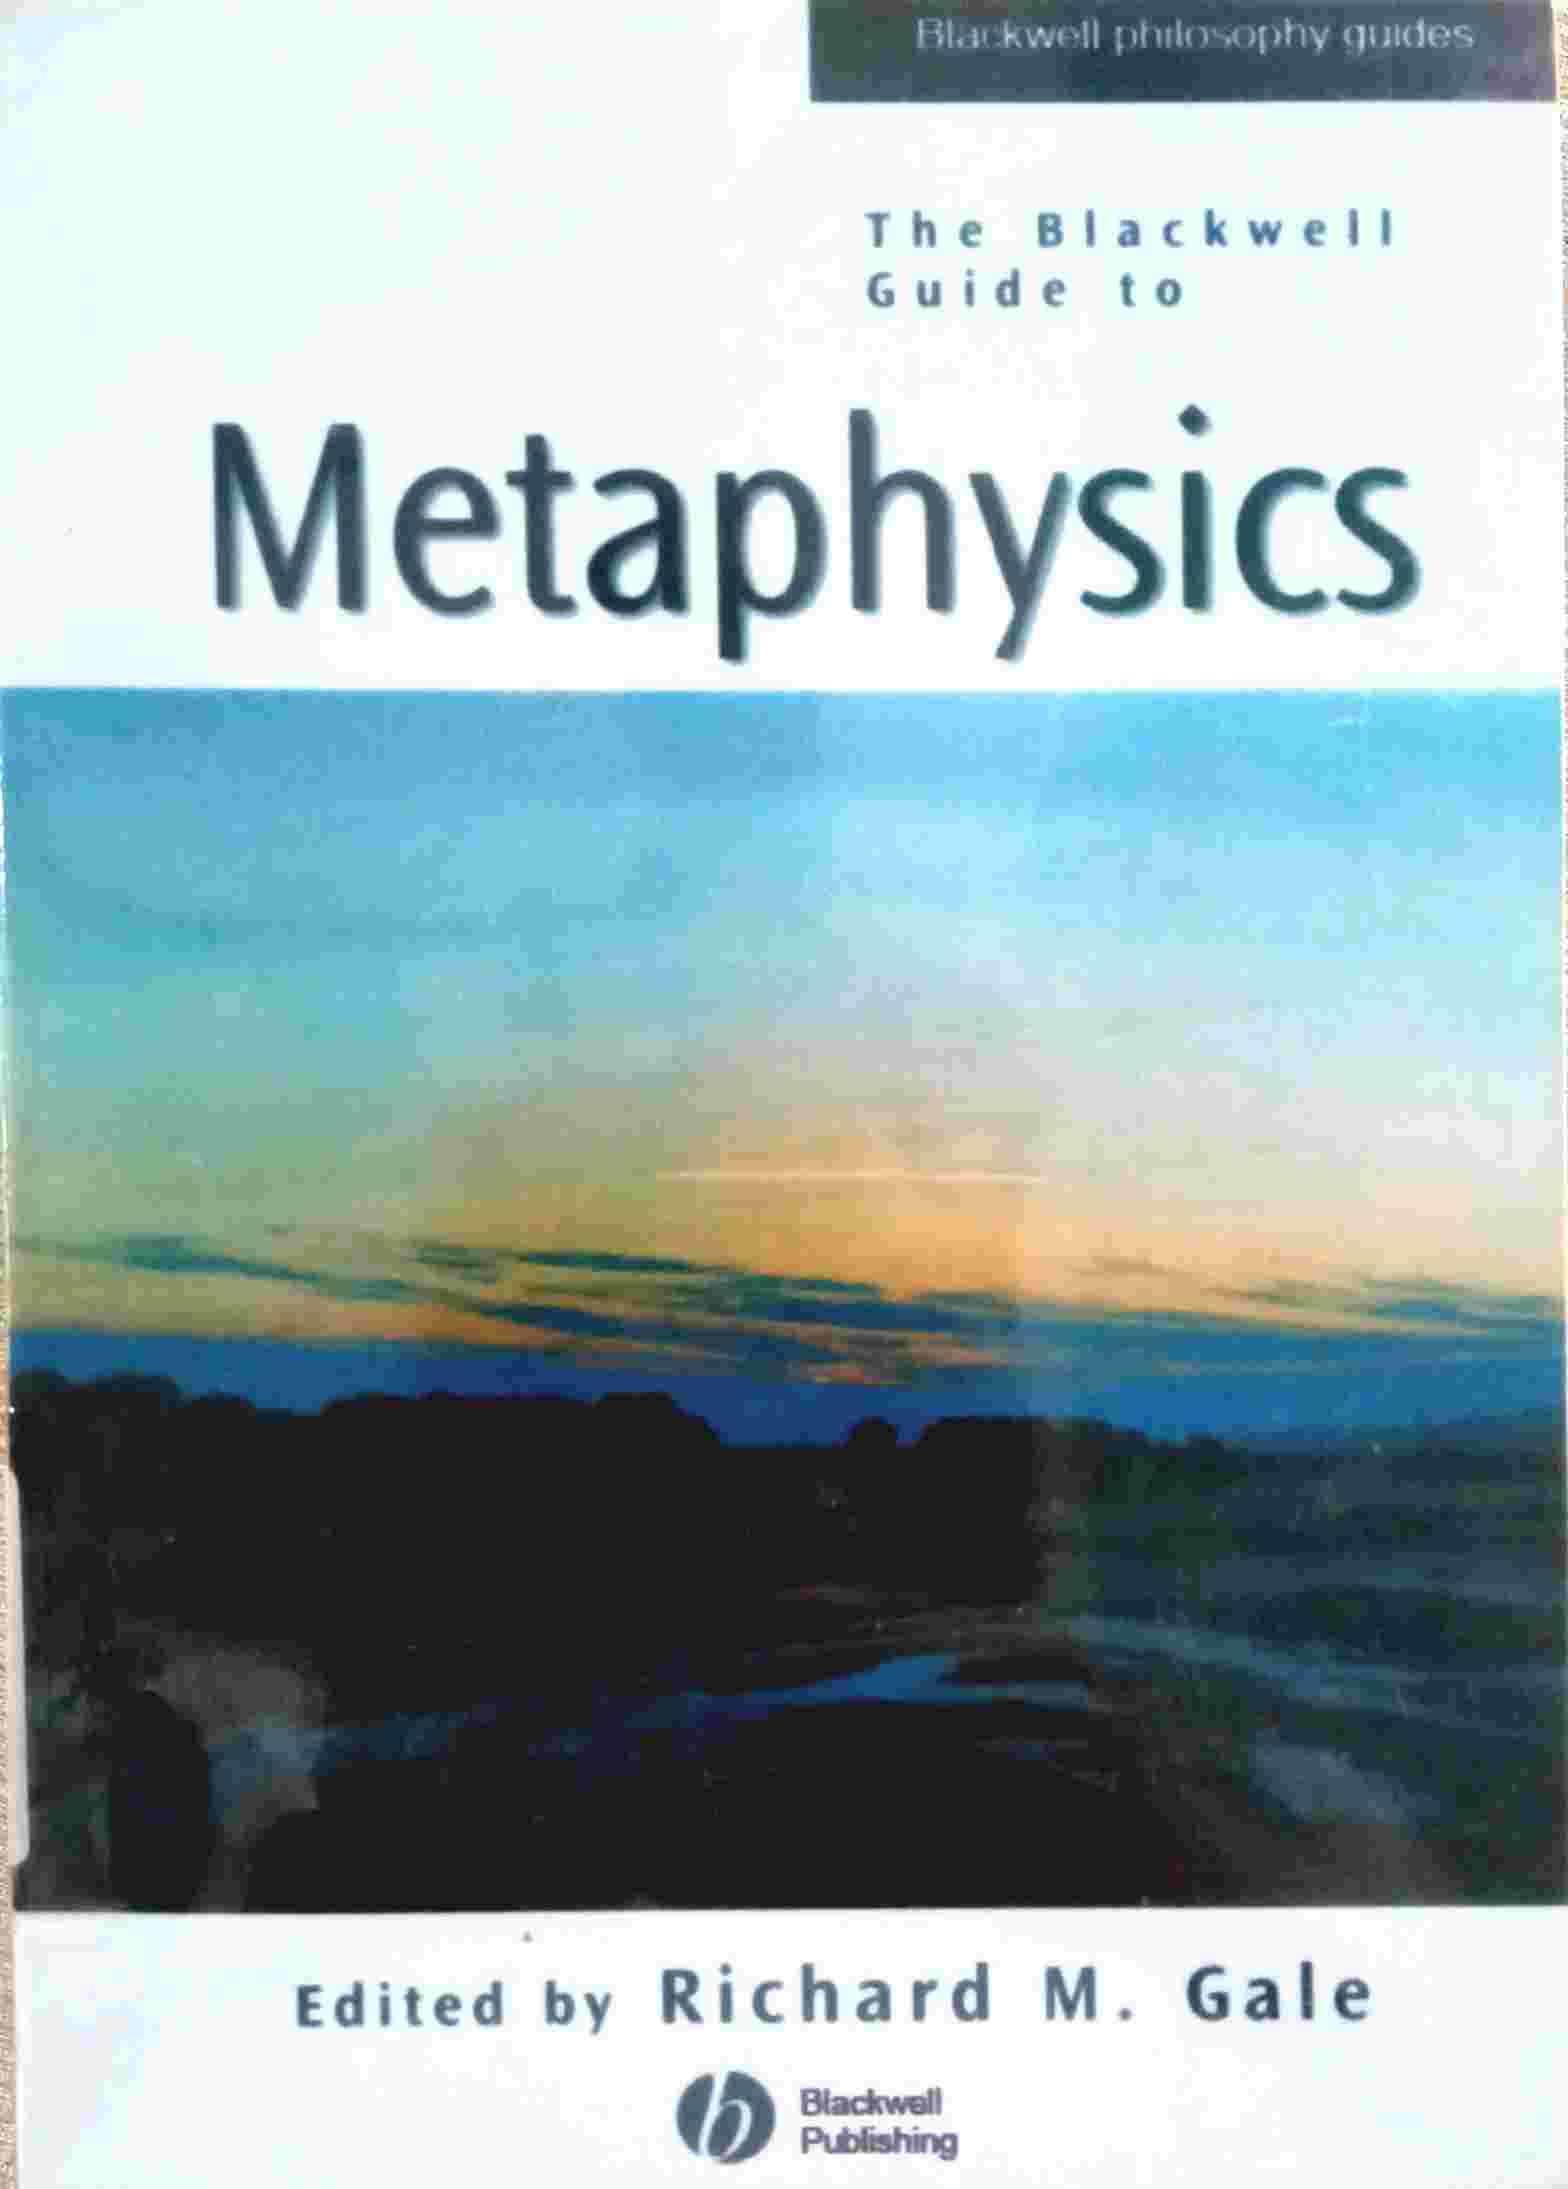 THE BLACKWELL GUIDE TO METAPHYSICS